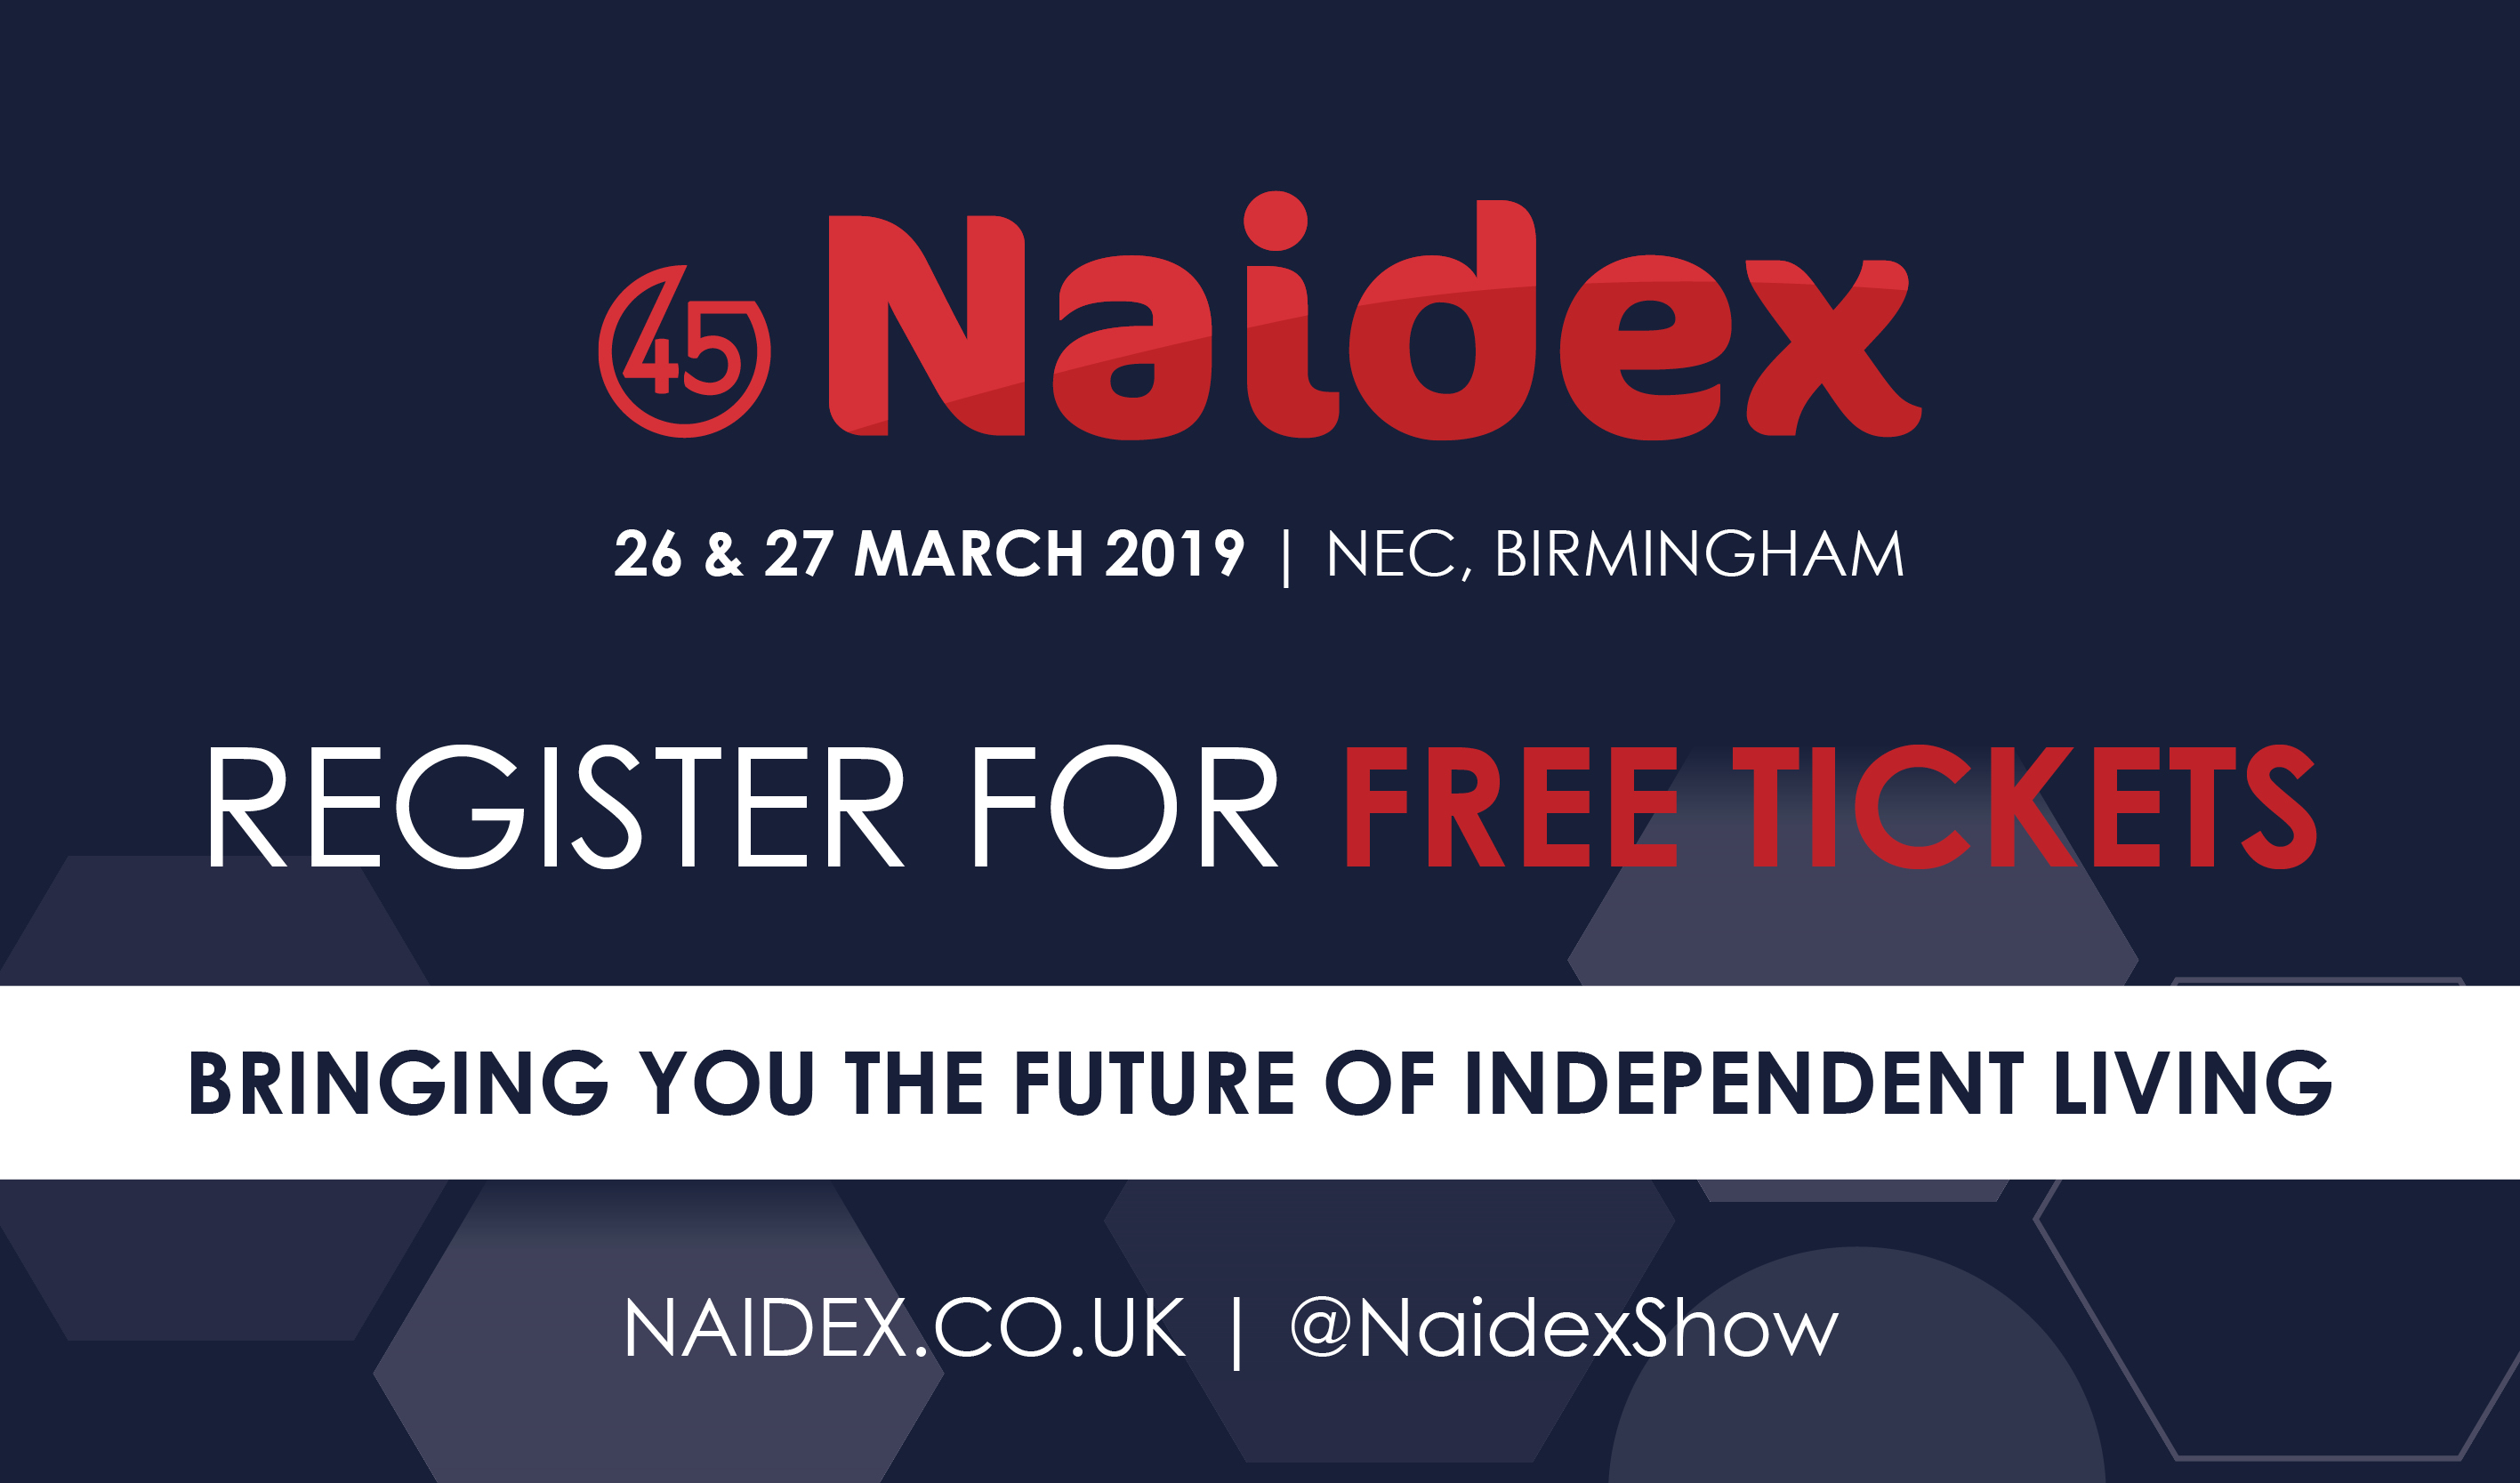 Naidex 45, 26th and 27th March 2019 at the NEC Birmingham. Register for your free tickets link